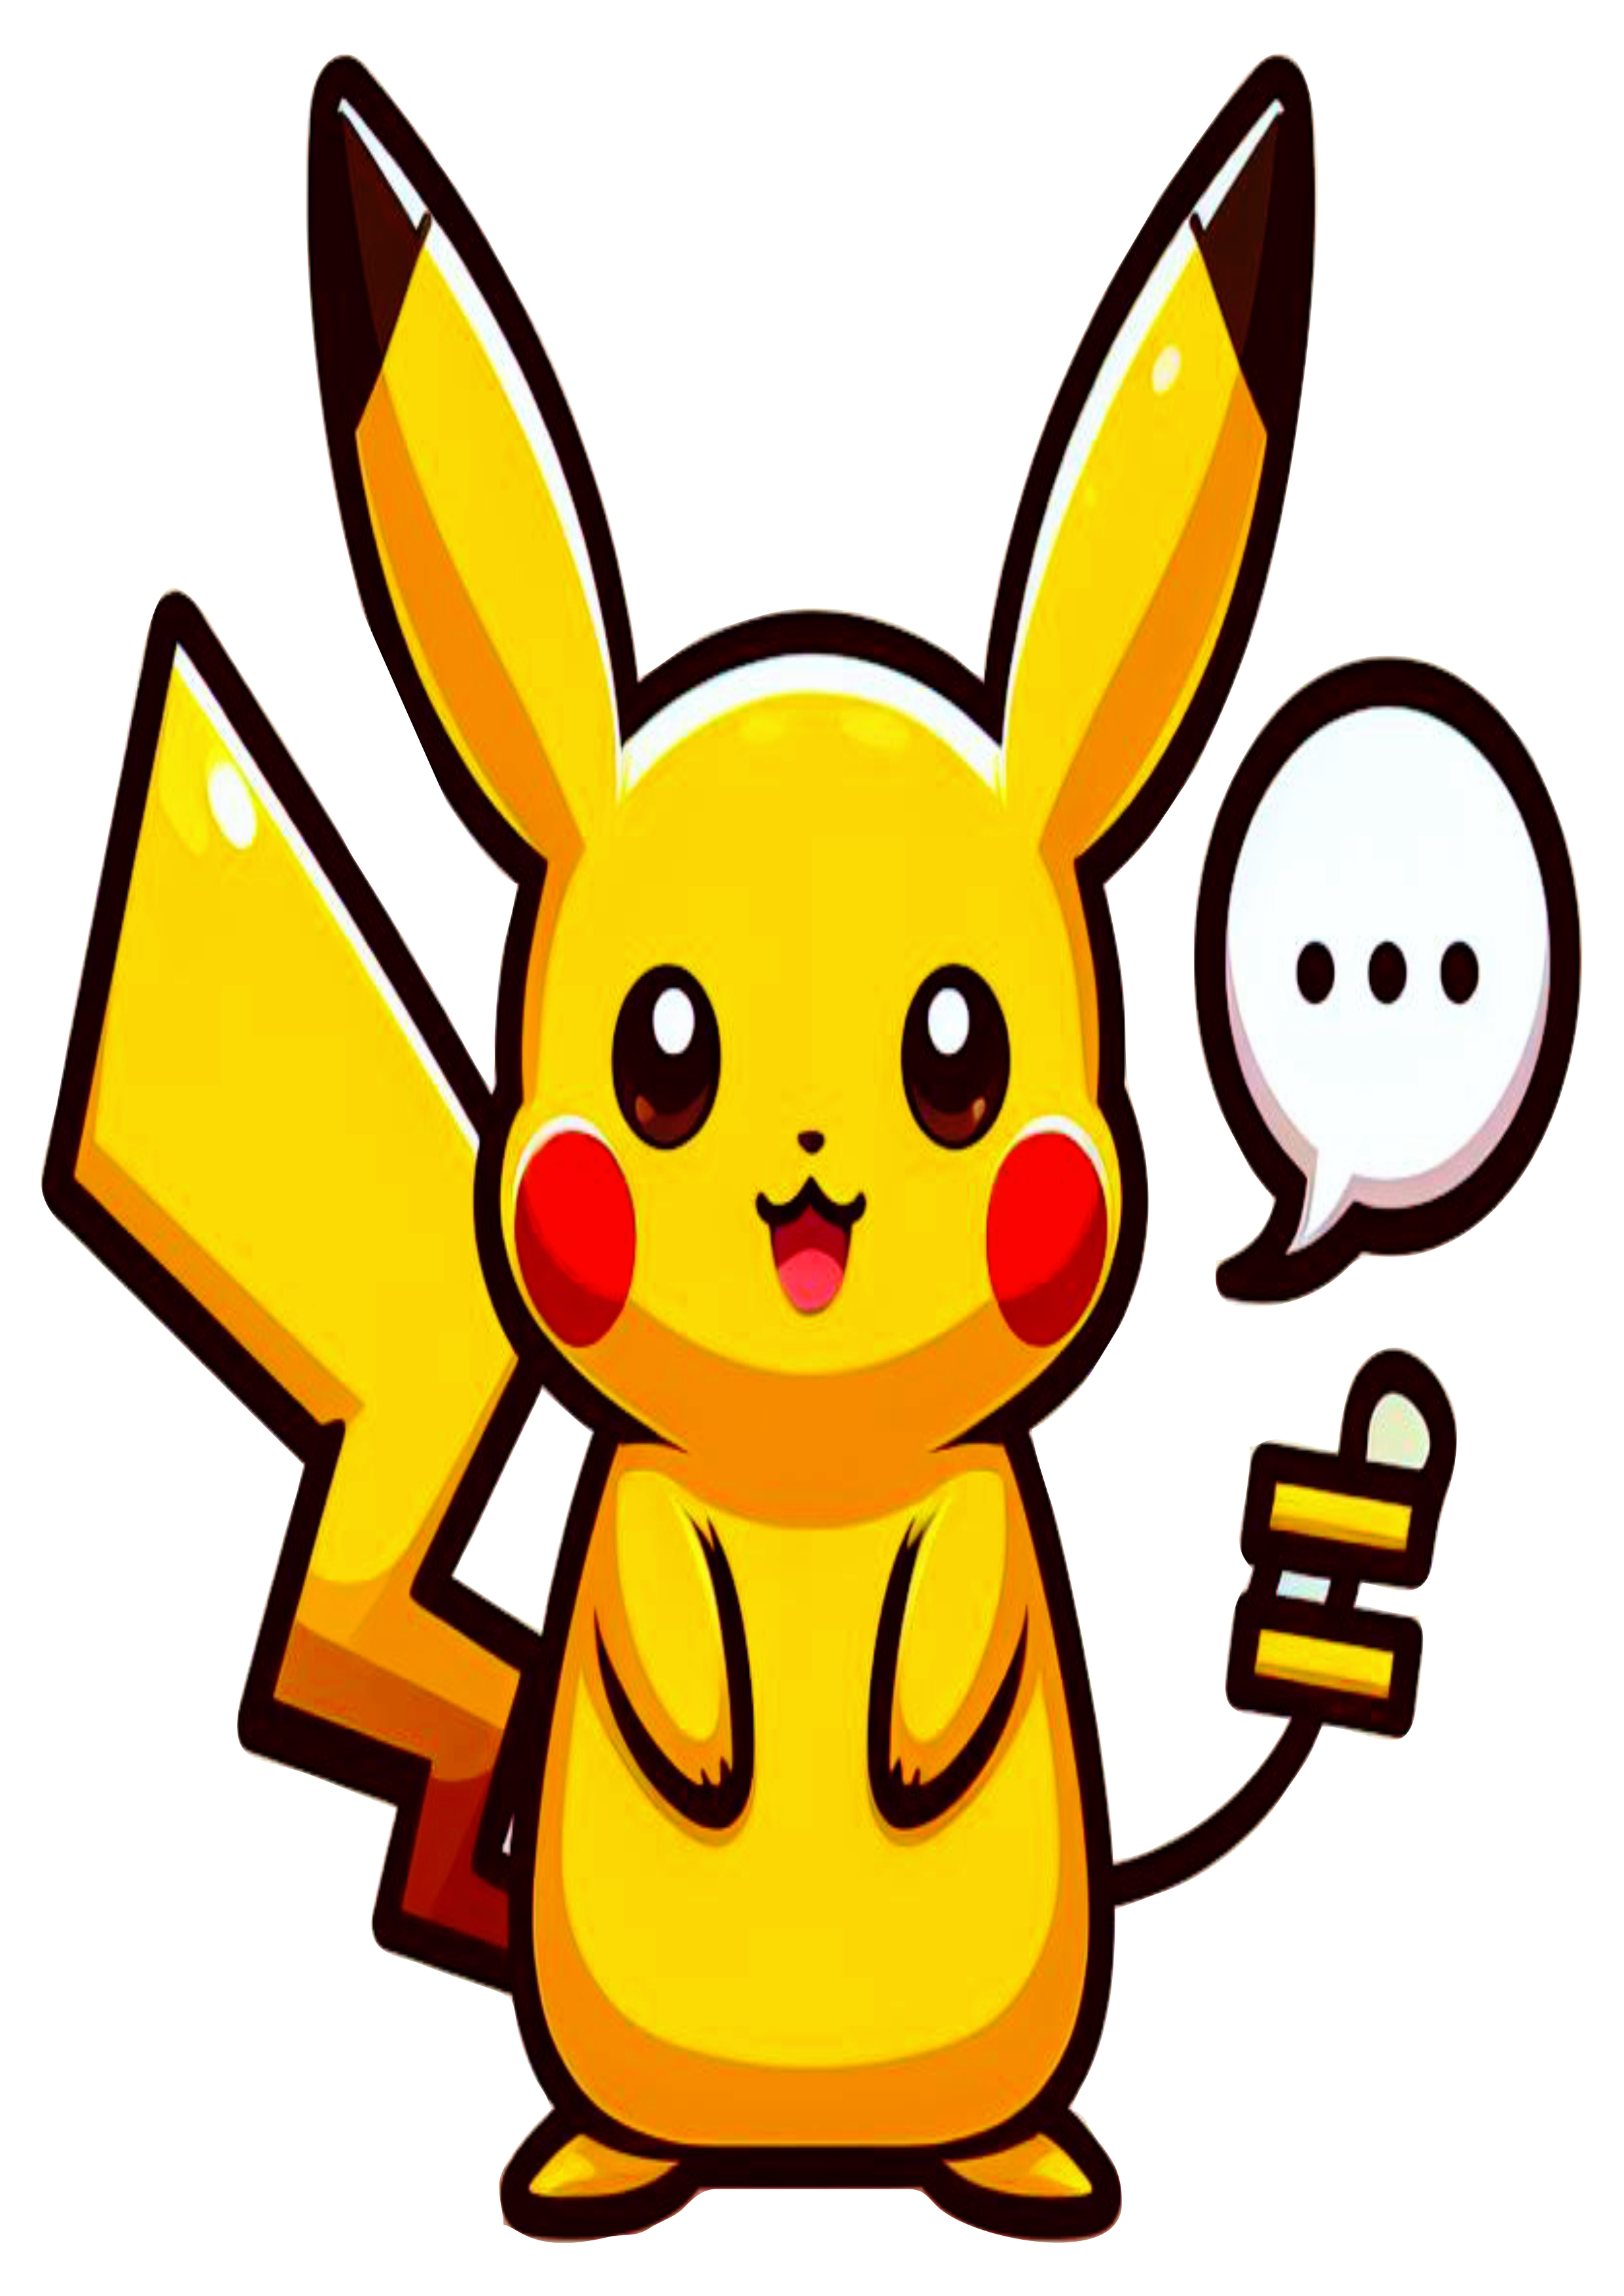 Pokemon png Pikachu anime transparent background colorful drawing clipart vector